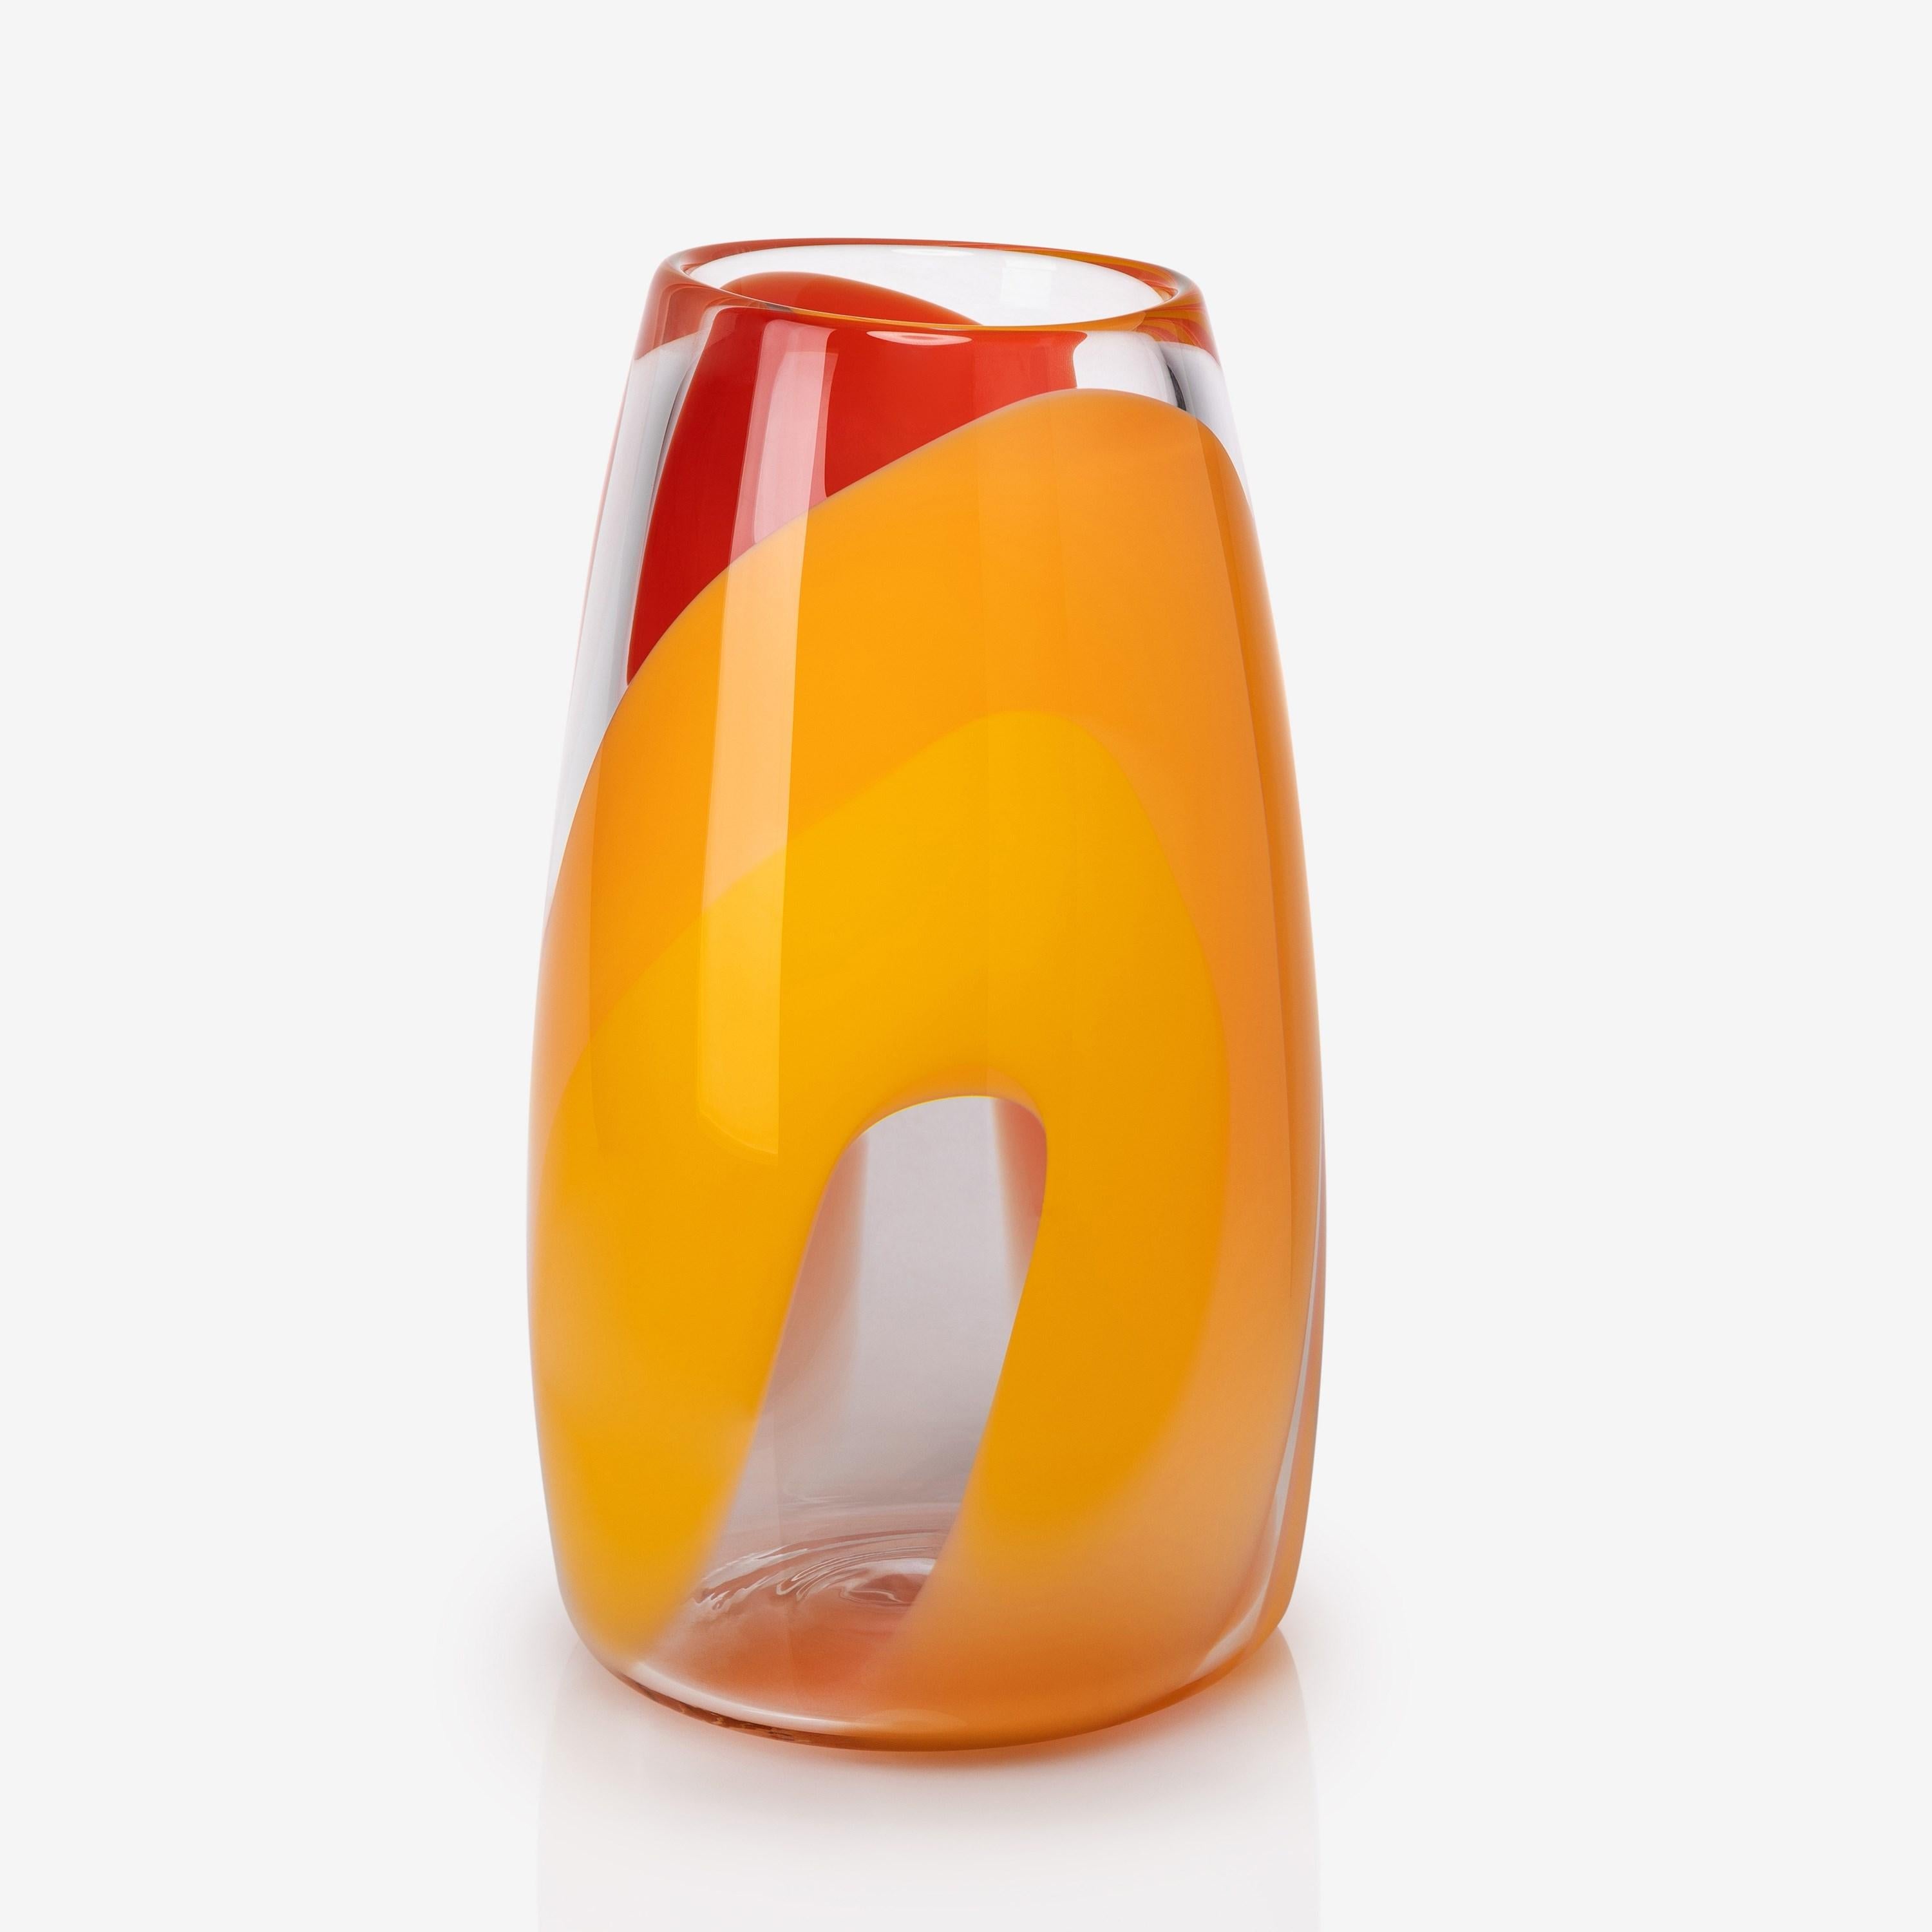 'Waves No 464' is a handblown glass vase by the British artist, Neil Wilkin.

'Waves' is a collection of beautifully crafted, unique glass bowls and centrepieces by the British artist Neil Wilkin. Taking a painterly approach, Neil Wilkin merges his